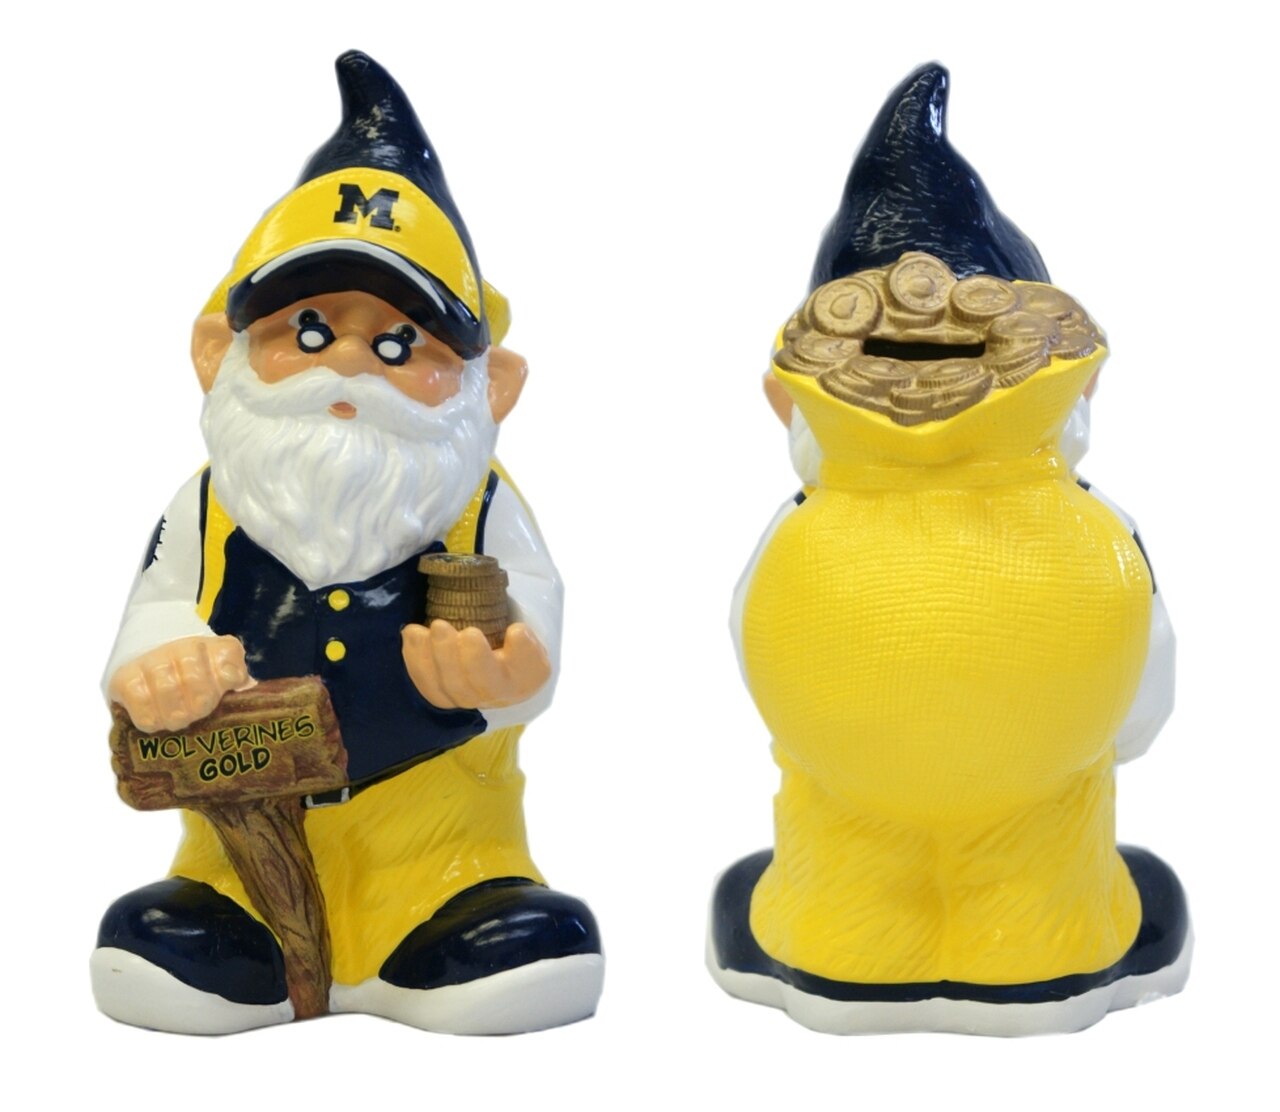 Michigan Wolverines Garden Gnome - Coin Bank by Forever Collectibles